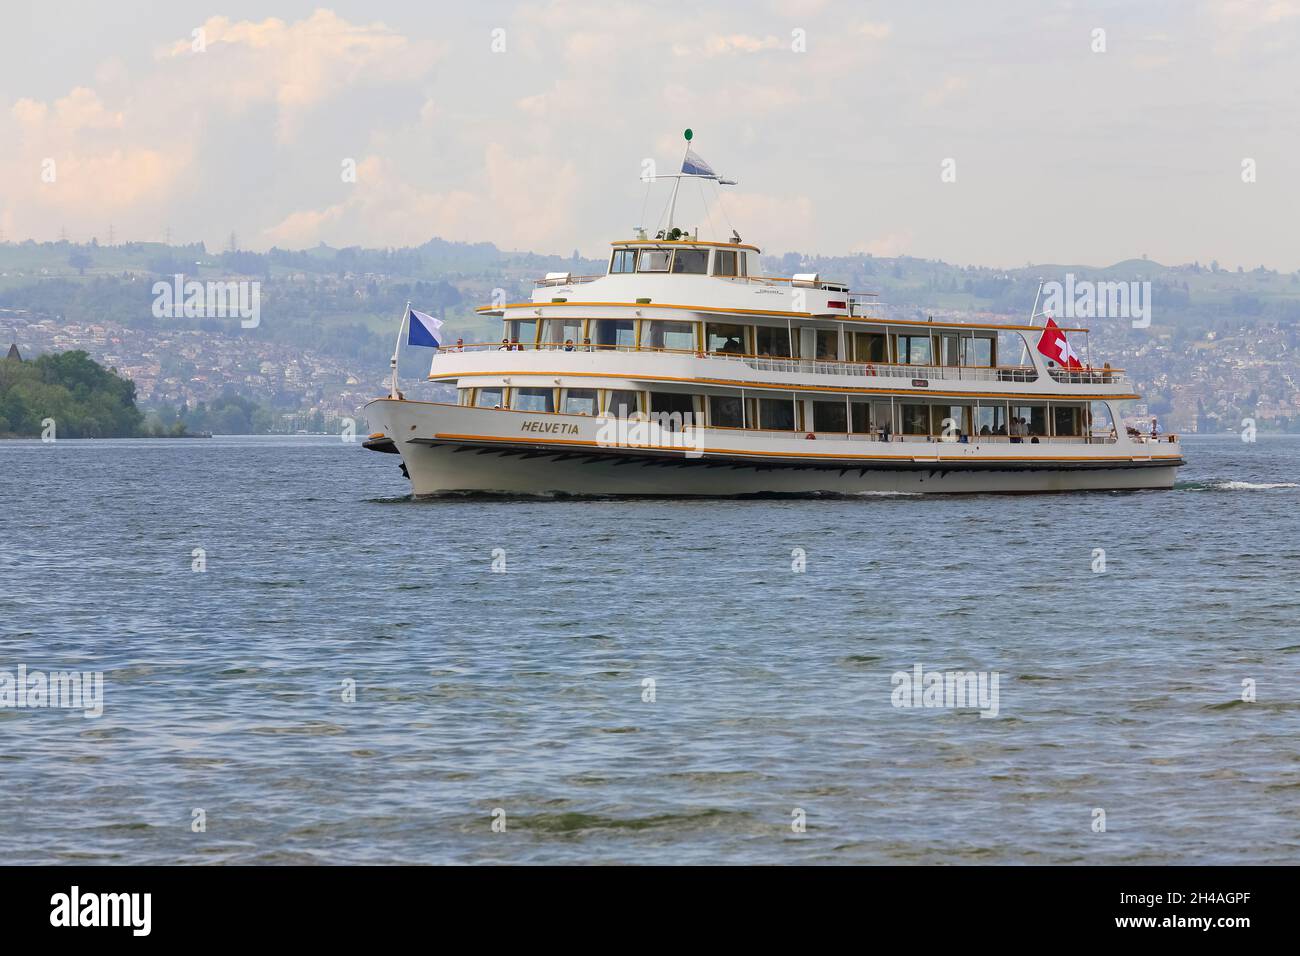 Rapperswil, Switzerland - May 10, 2016: MS Helvetia vessel arrives from Zurich to Rapperswill Ferry Terminal. The name Helvetia expresses the female n Stock Photo